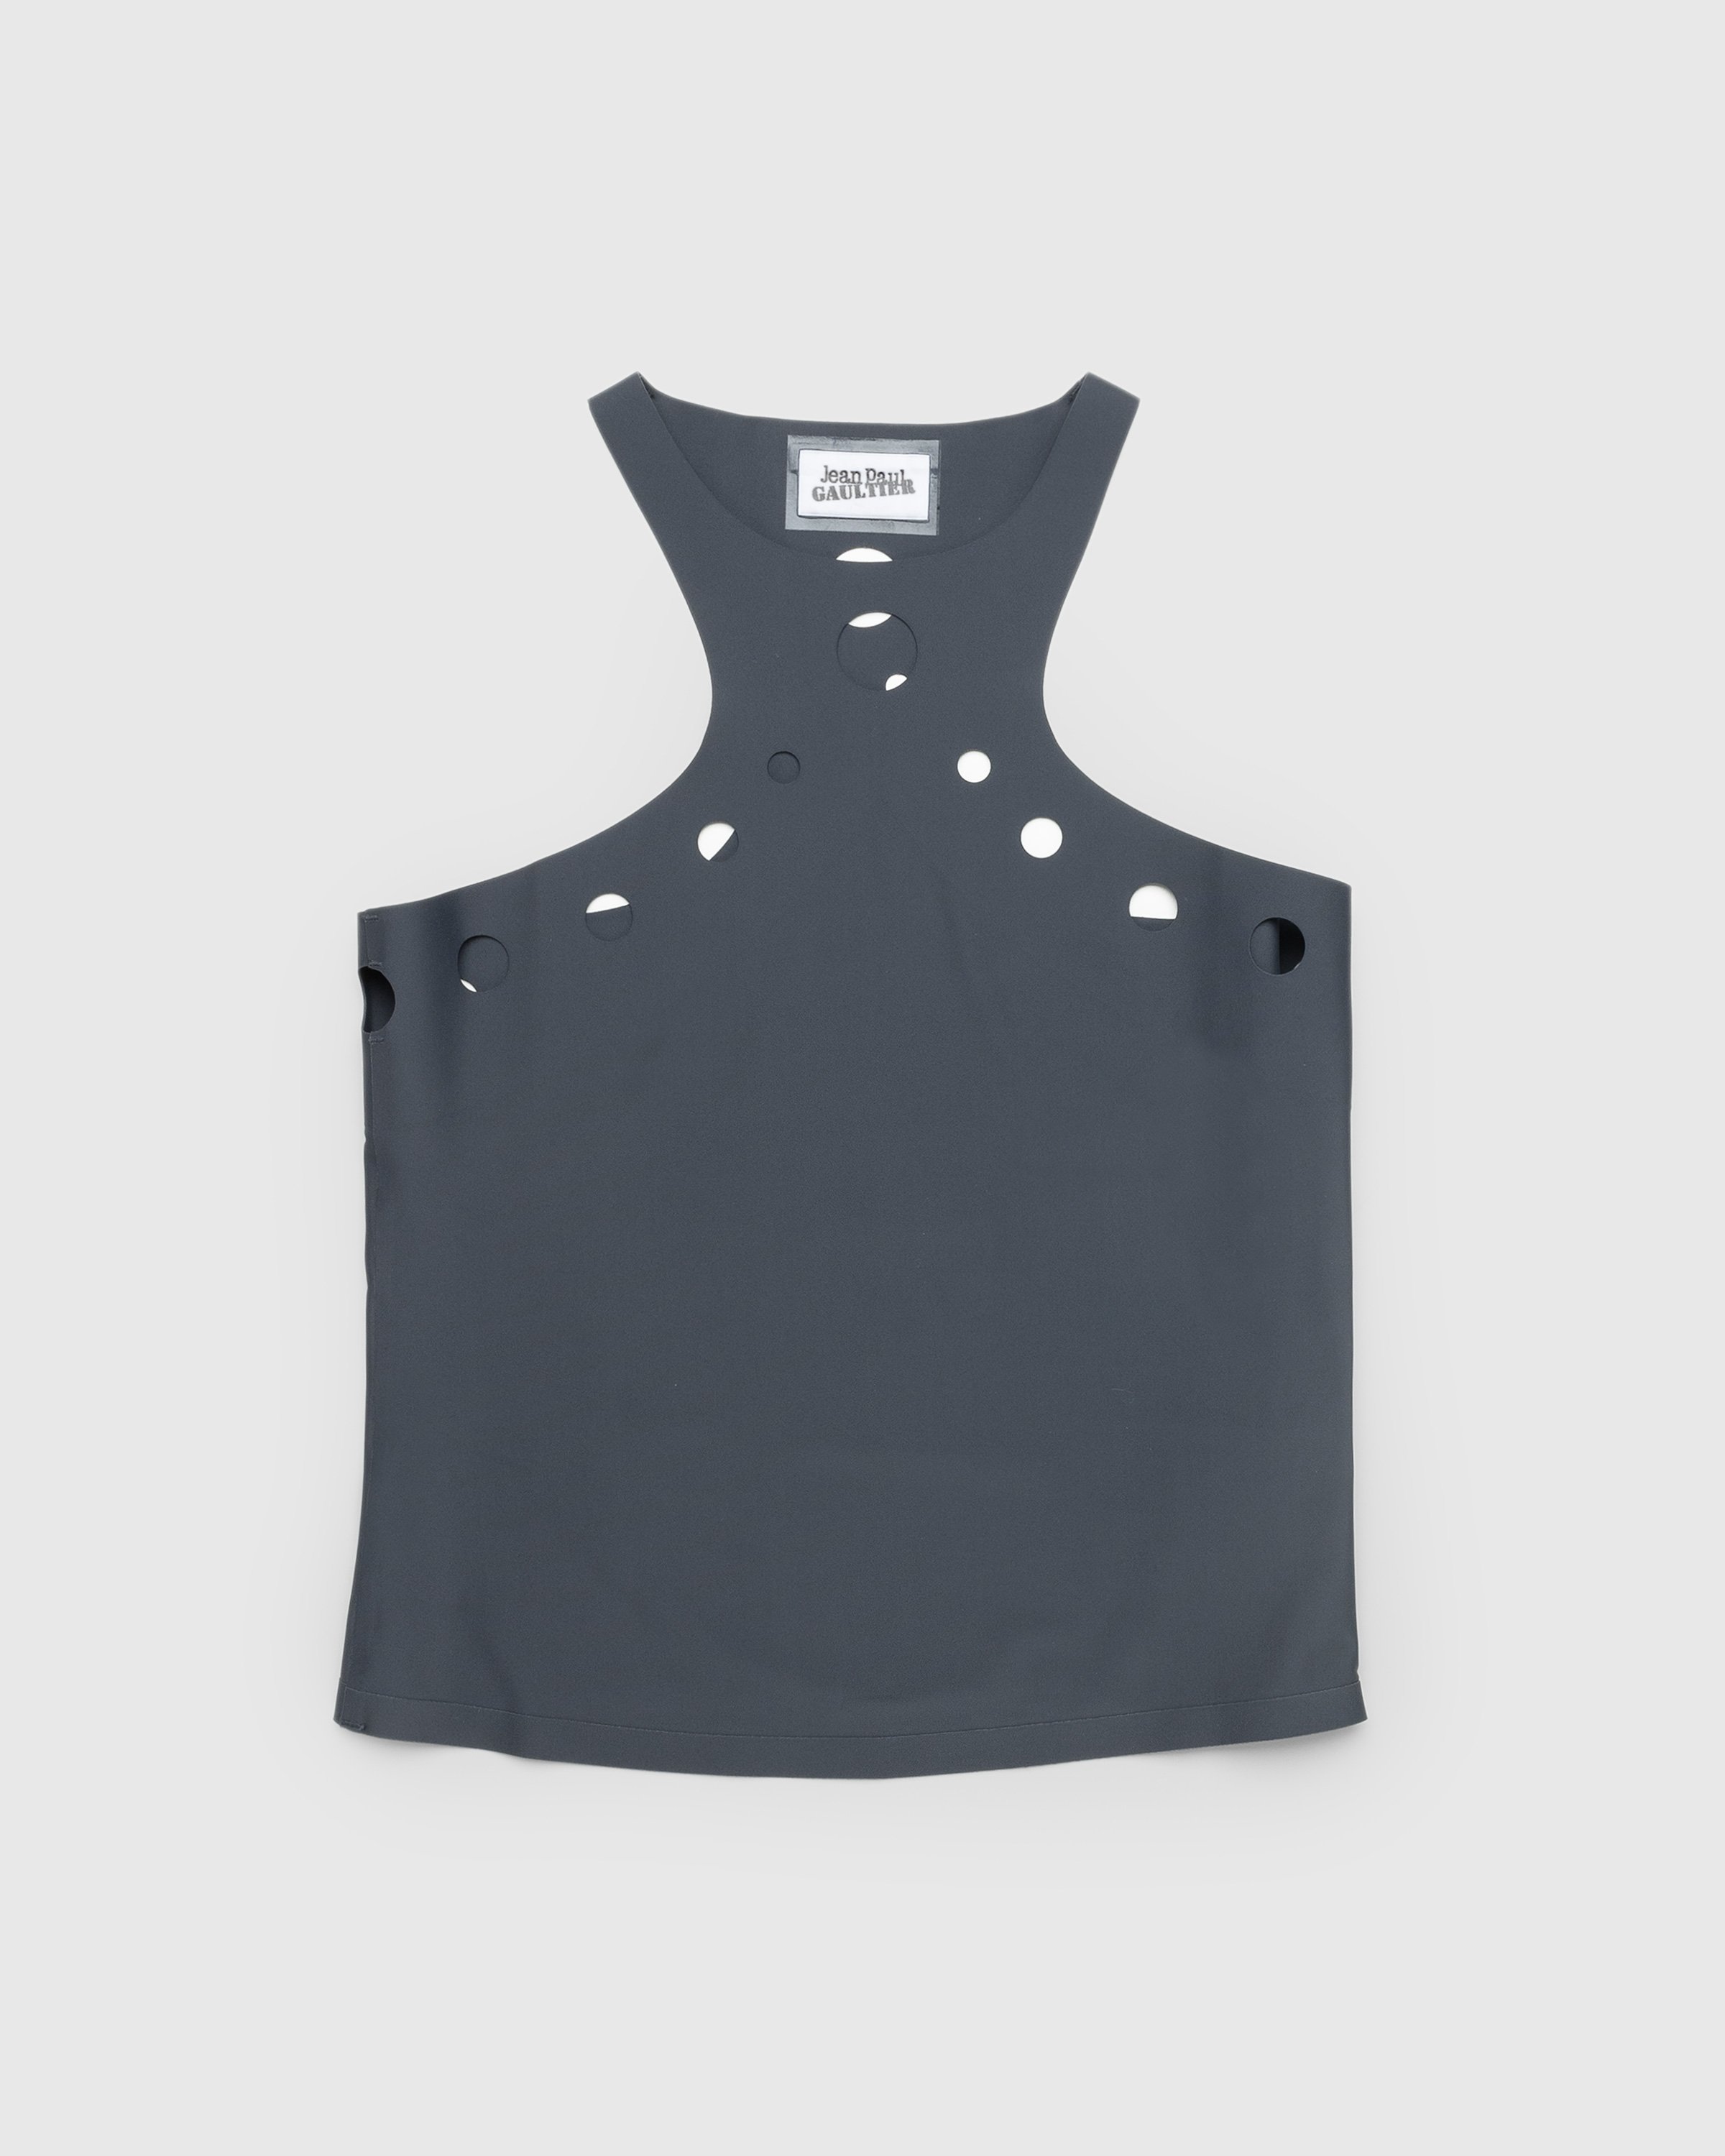 Jean Paul Gaultier - Perforated Details Tanktop - Clothing - Grey - Image 1